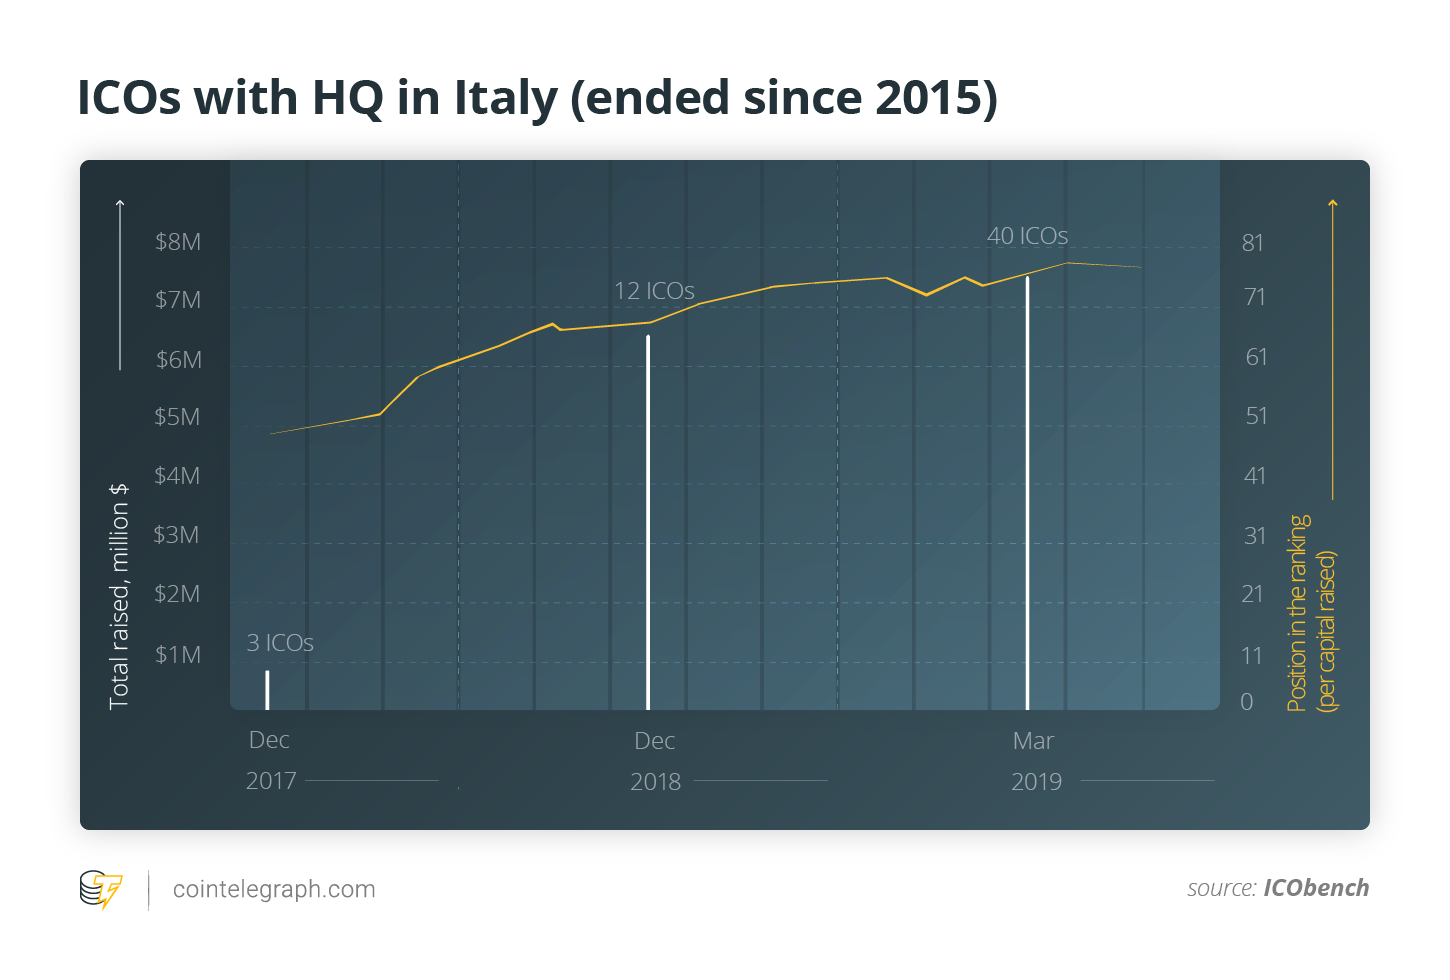 ICOs with HQ in Italy (ended since 2015)